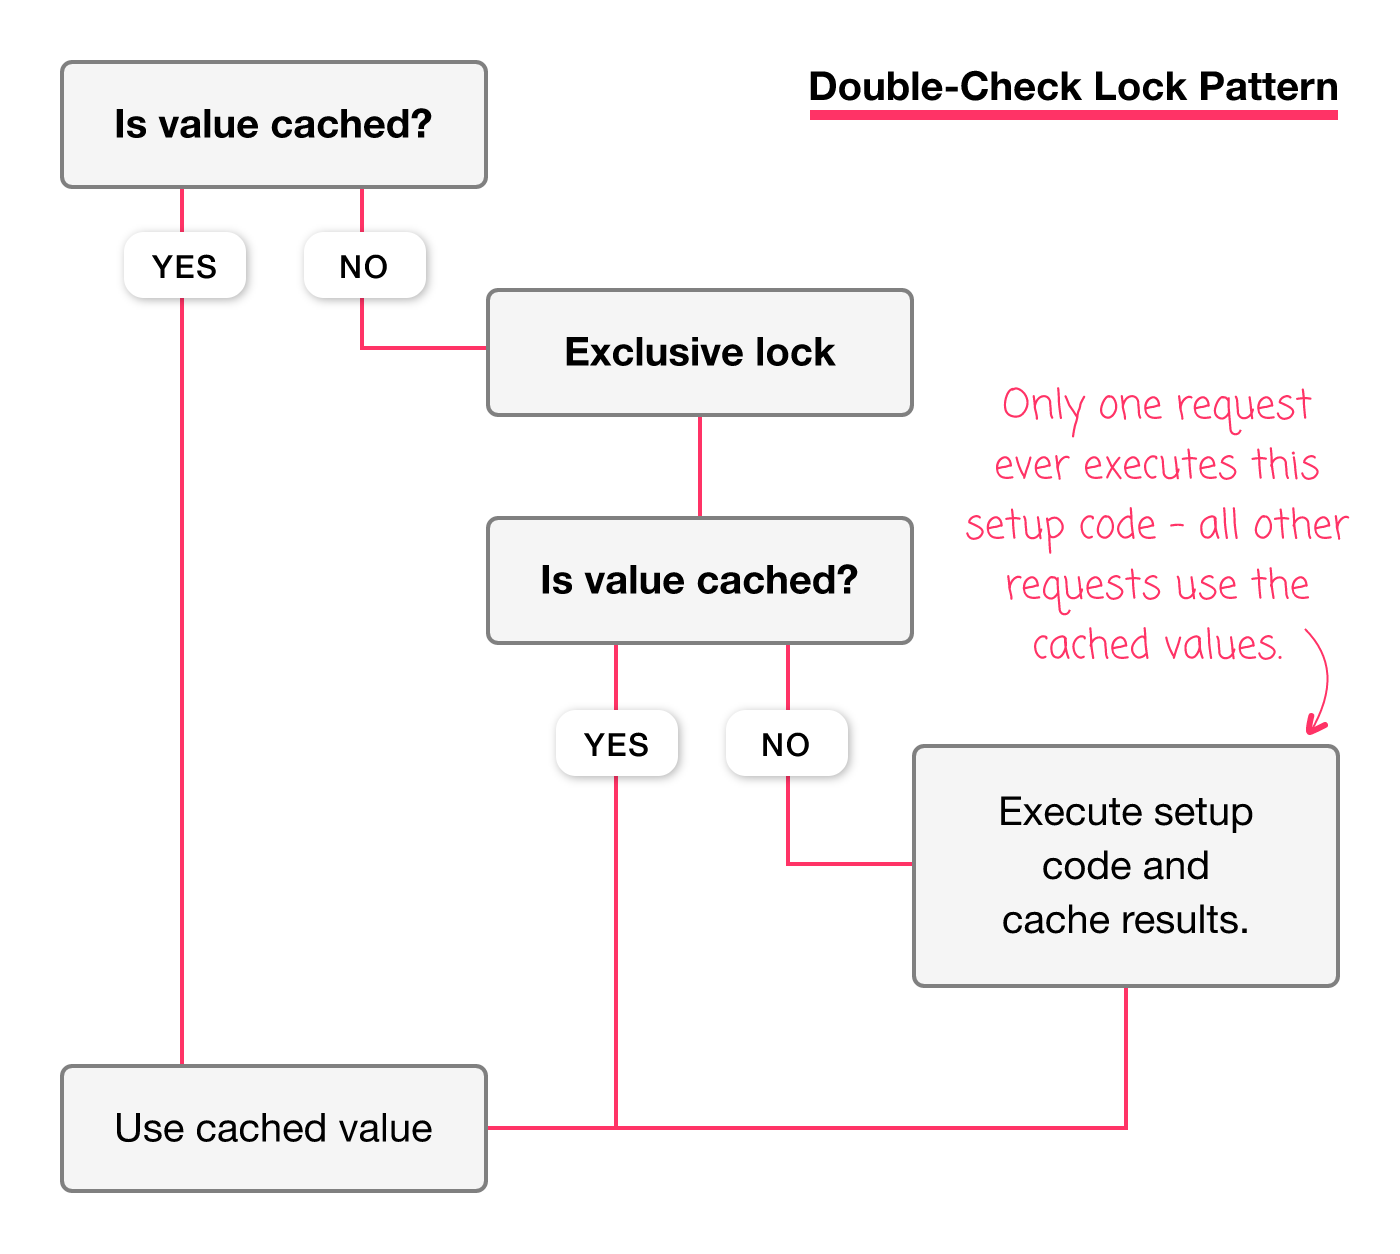 Double-check lock decision tree shows when cached values are used and when values are initially cached.